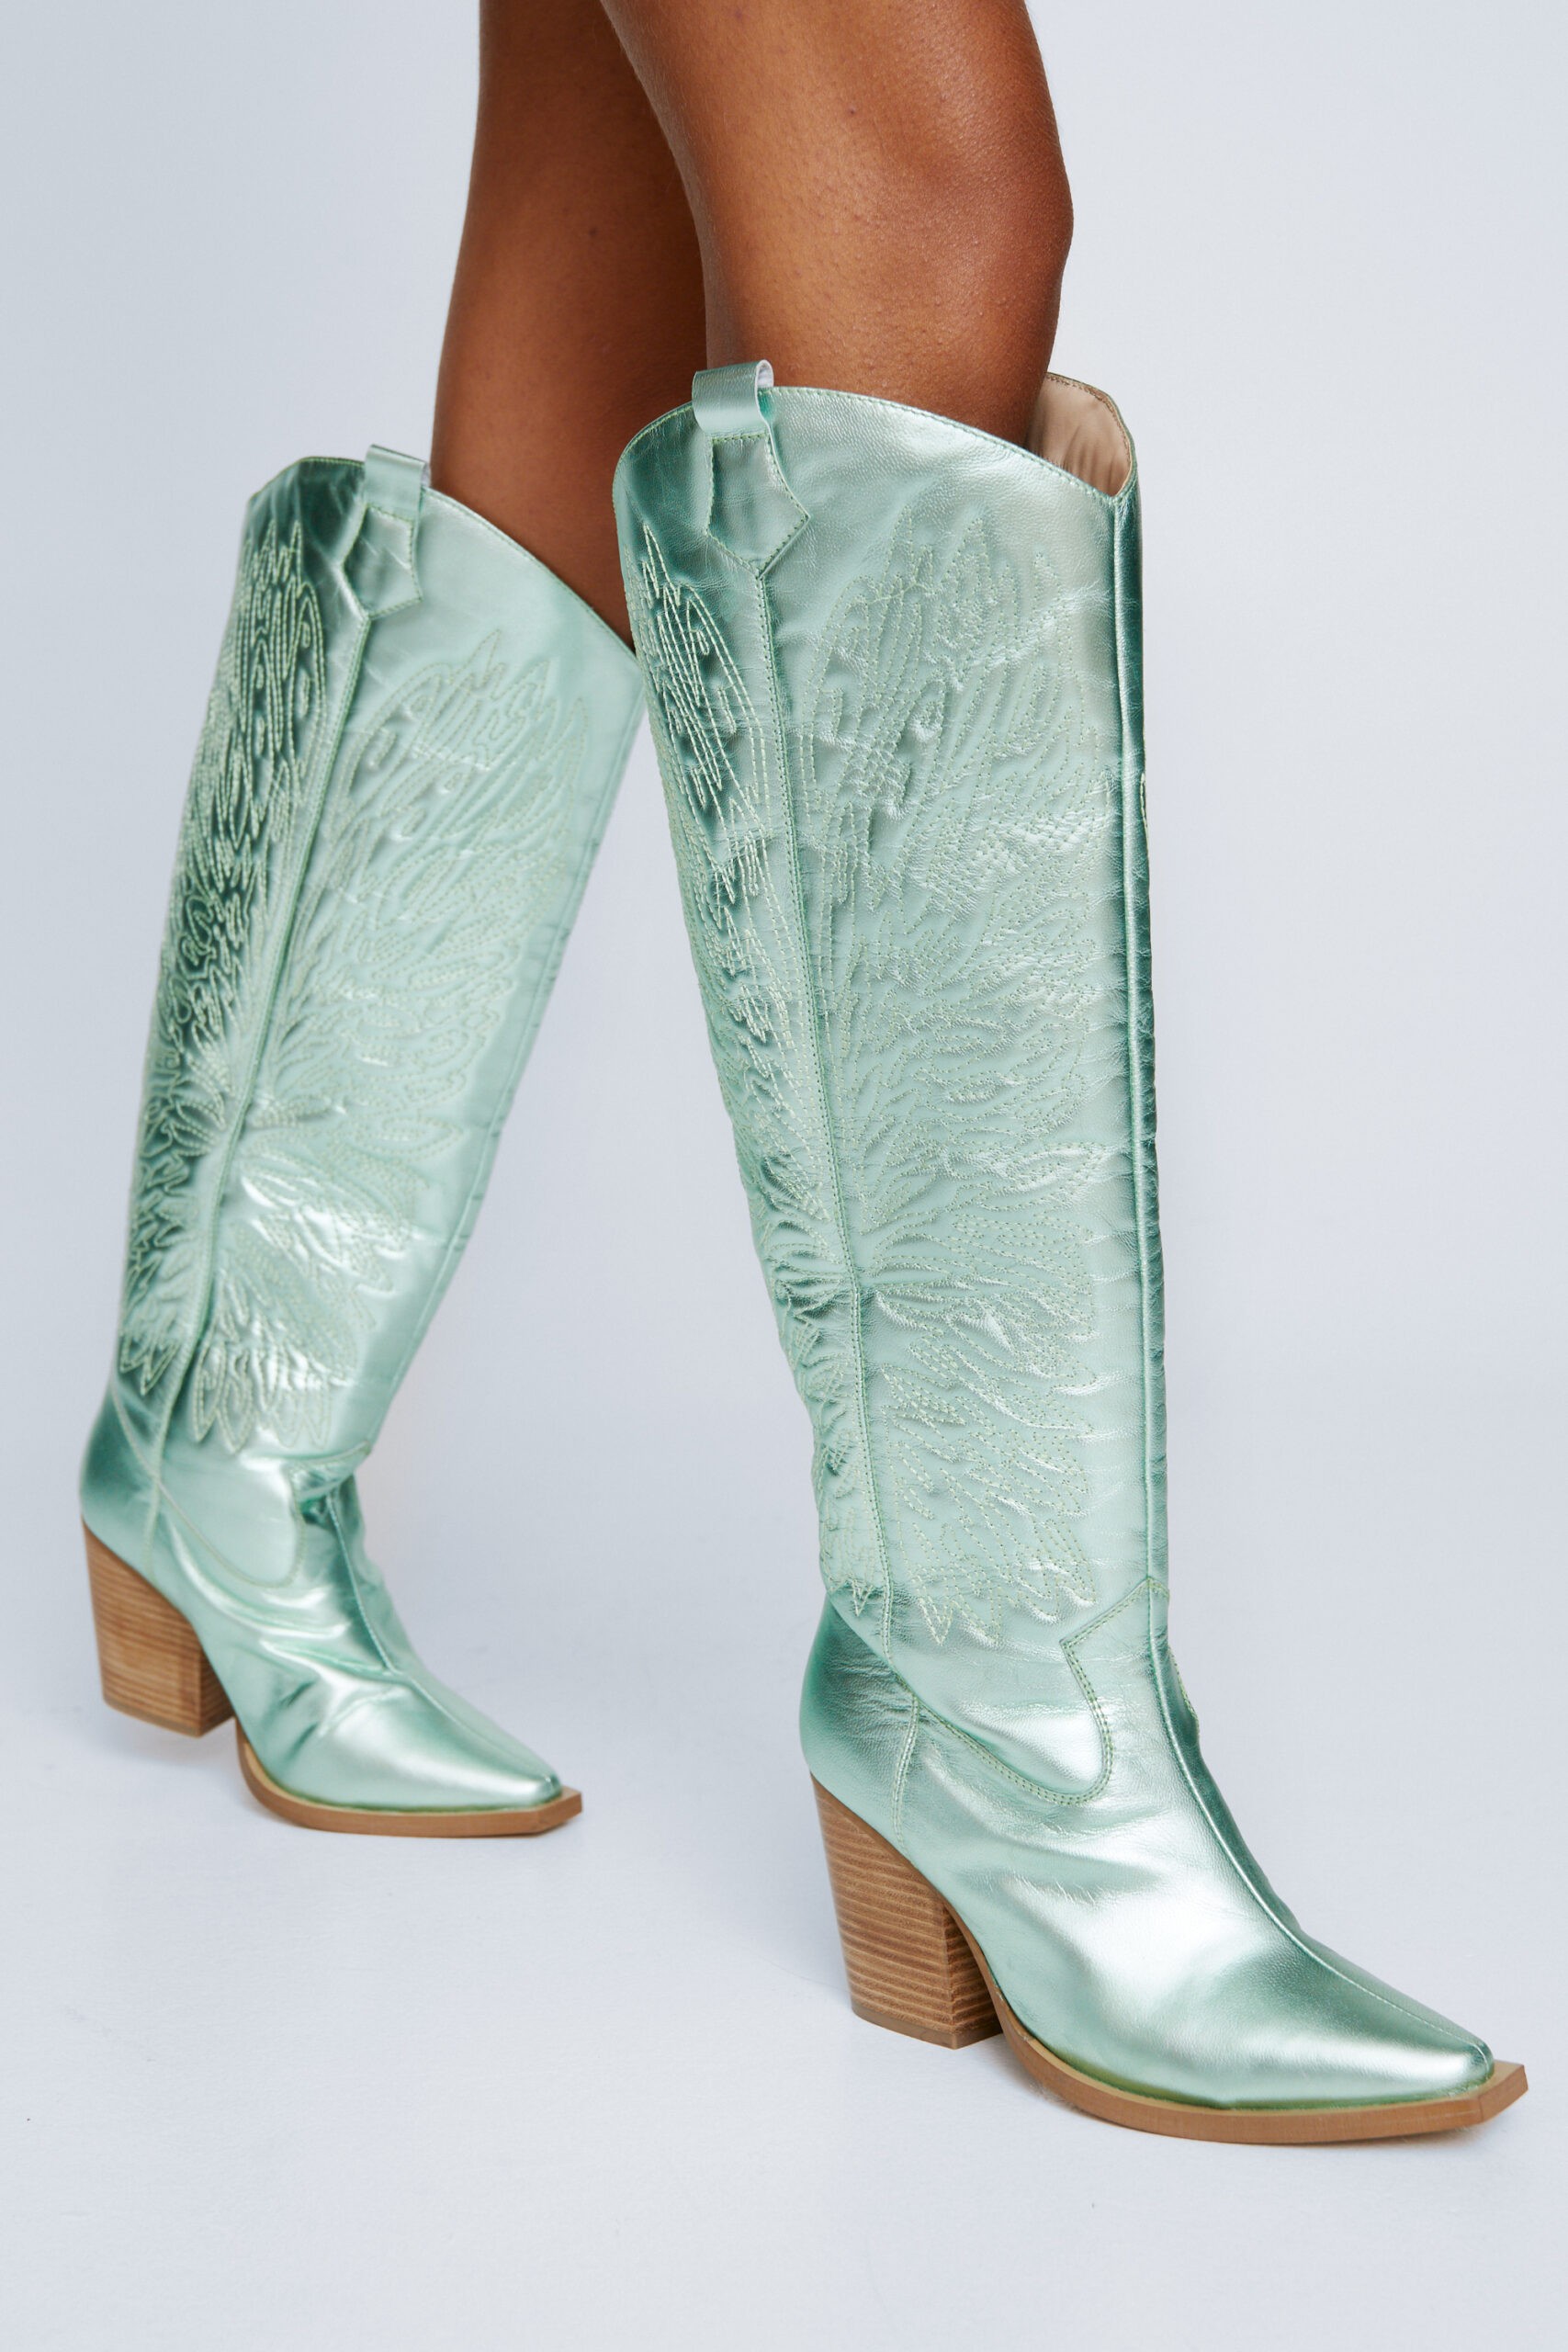 Leather Metallic Butterfly Embroidery Knee High Cowboy Boots